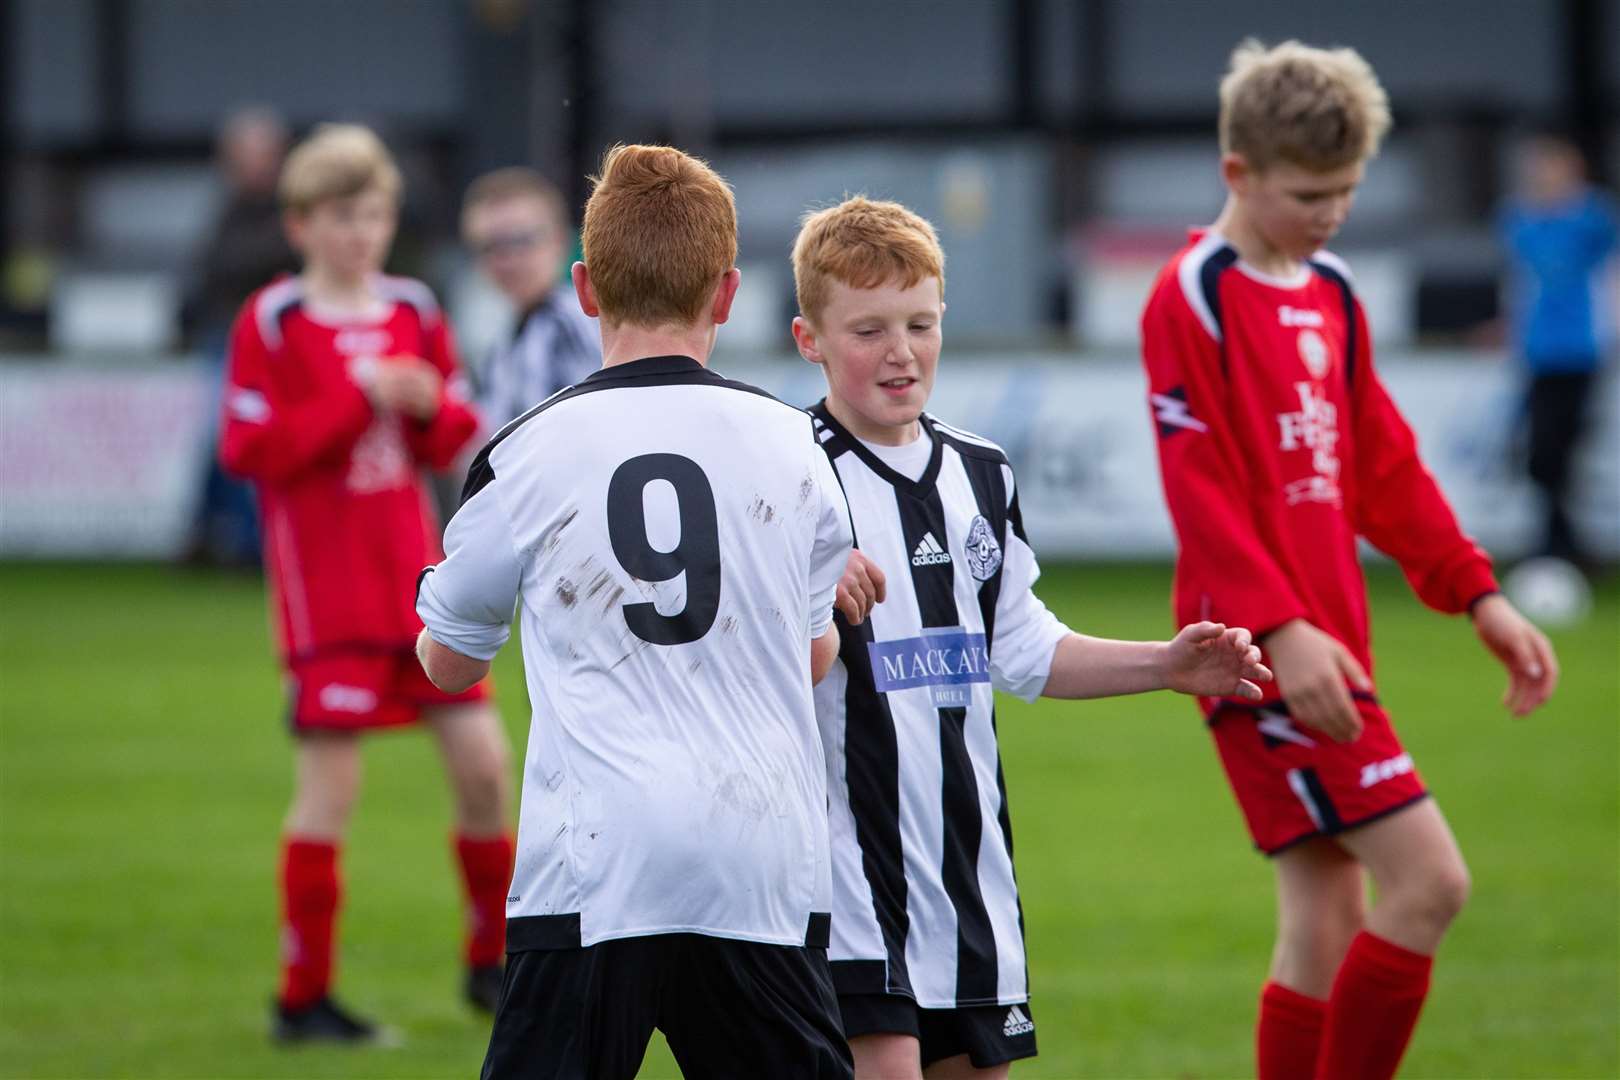 Number 9 Morgan Kennedy congratulates Jayden Bremner on his first Caithness United goal. Picture: Gareth Watkins